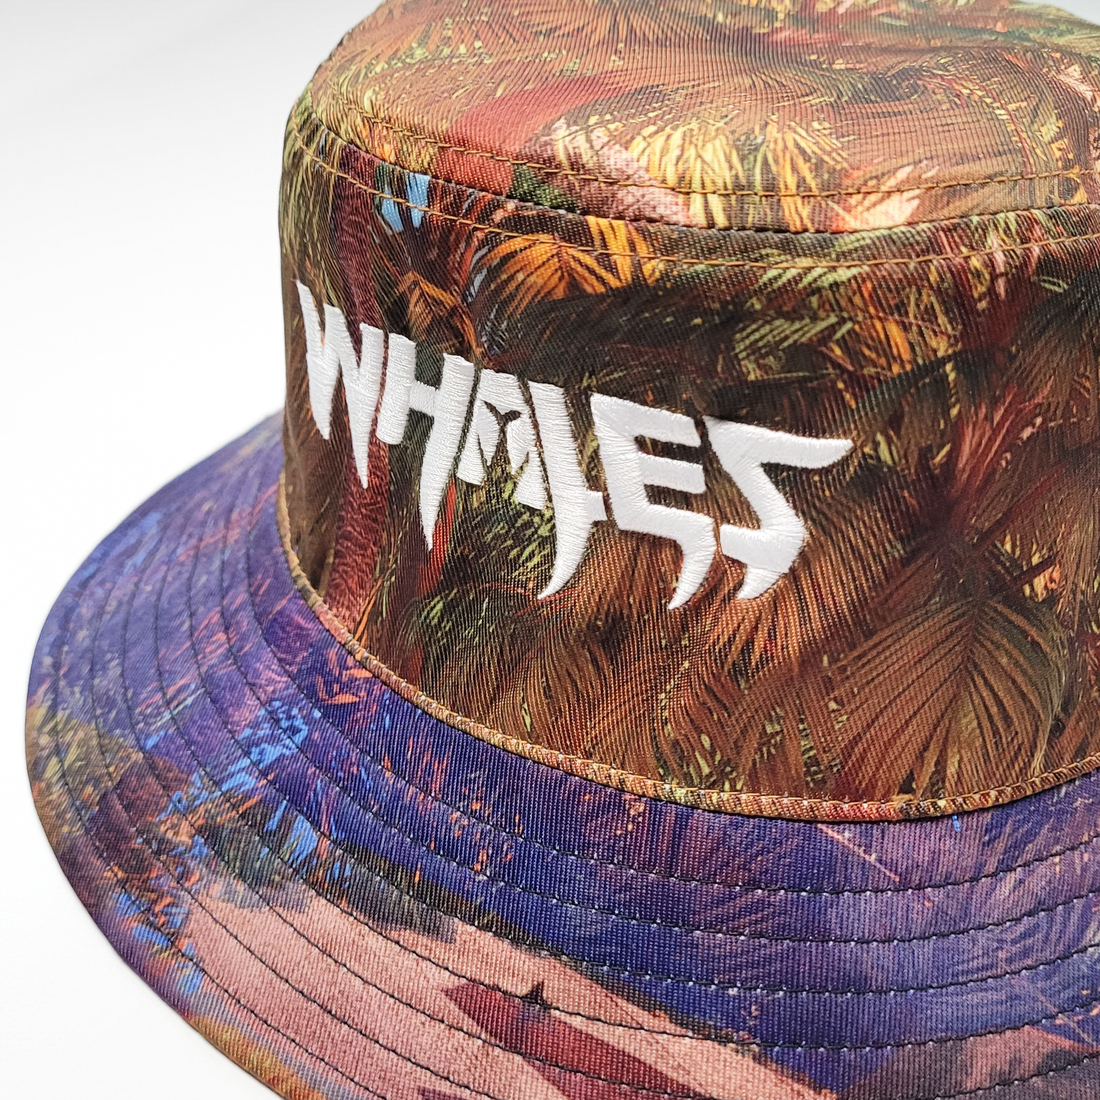 PRE SALE - WHALES - Two Worlds Apart Bucket Hat